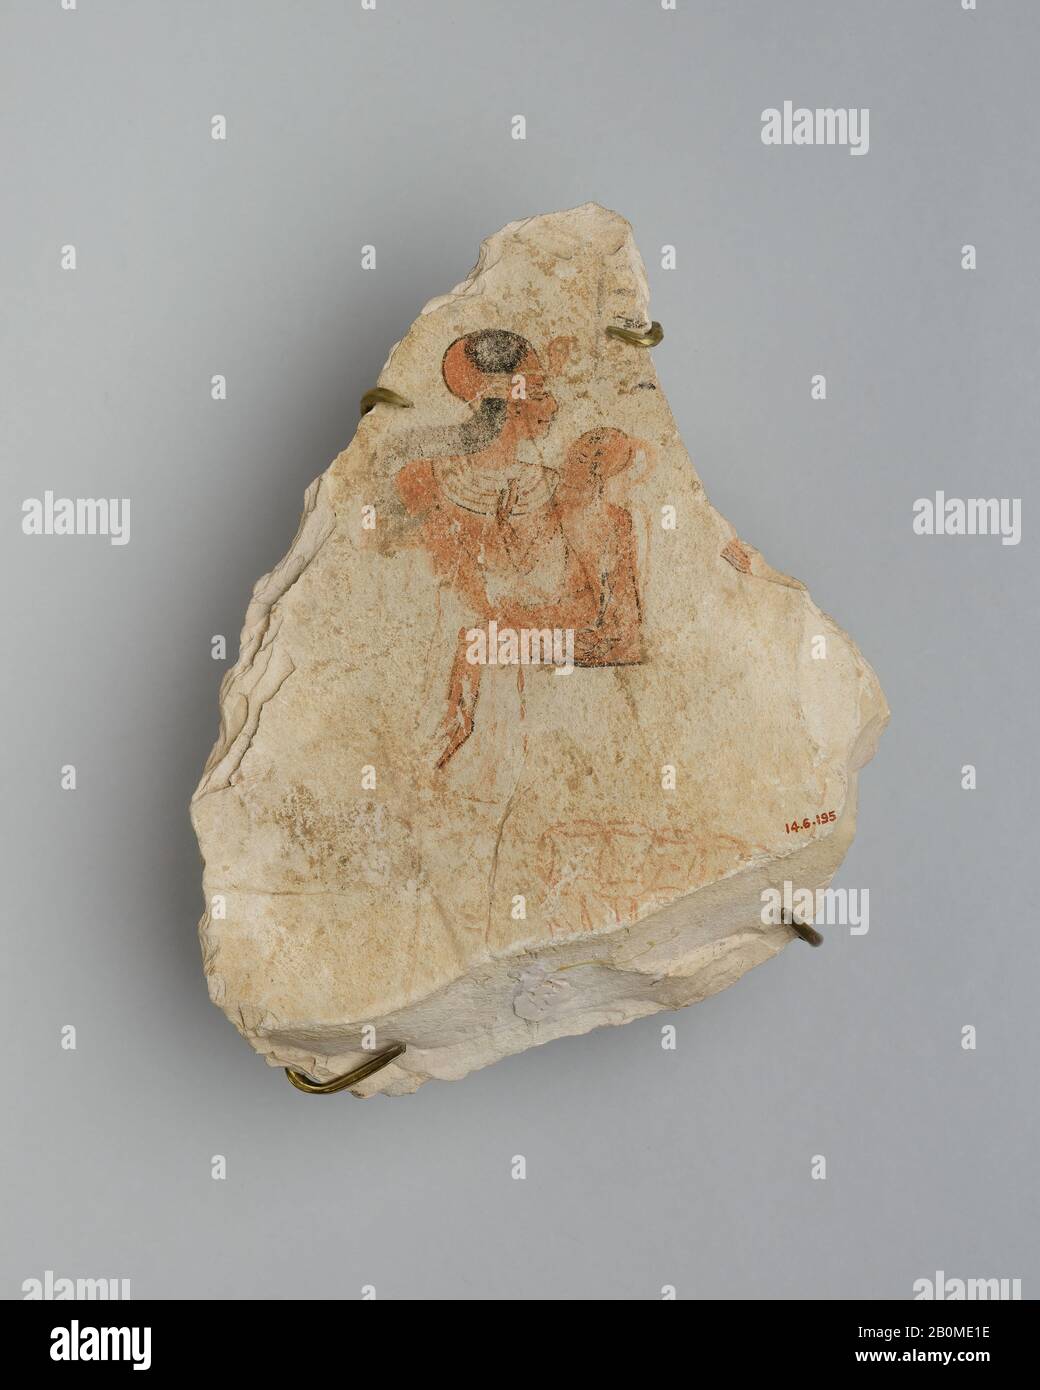 Ostracon, New Kingdom, Ramesside, Dynasty 19–20, ca. 1295–1070 B.C., From Egypt, Upper Egypt, Thebes, Valley of the Kings, Limestone, paint, L. 15 cm (5 7/8 in); w. 13 cm (5 1/8 in Stock Photo